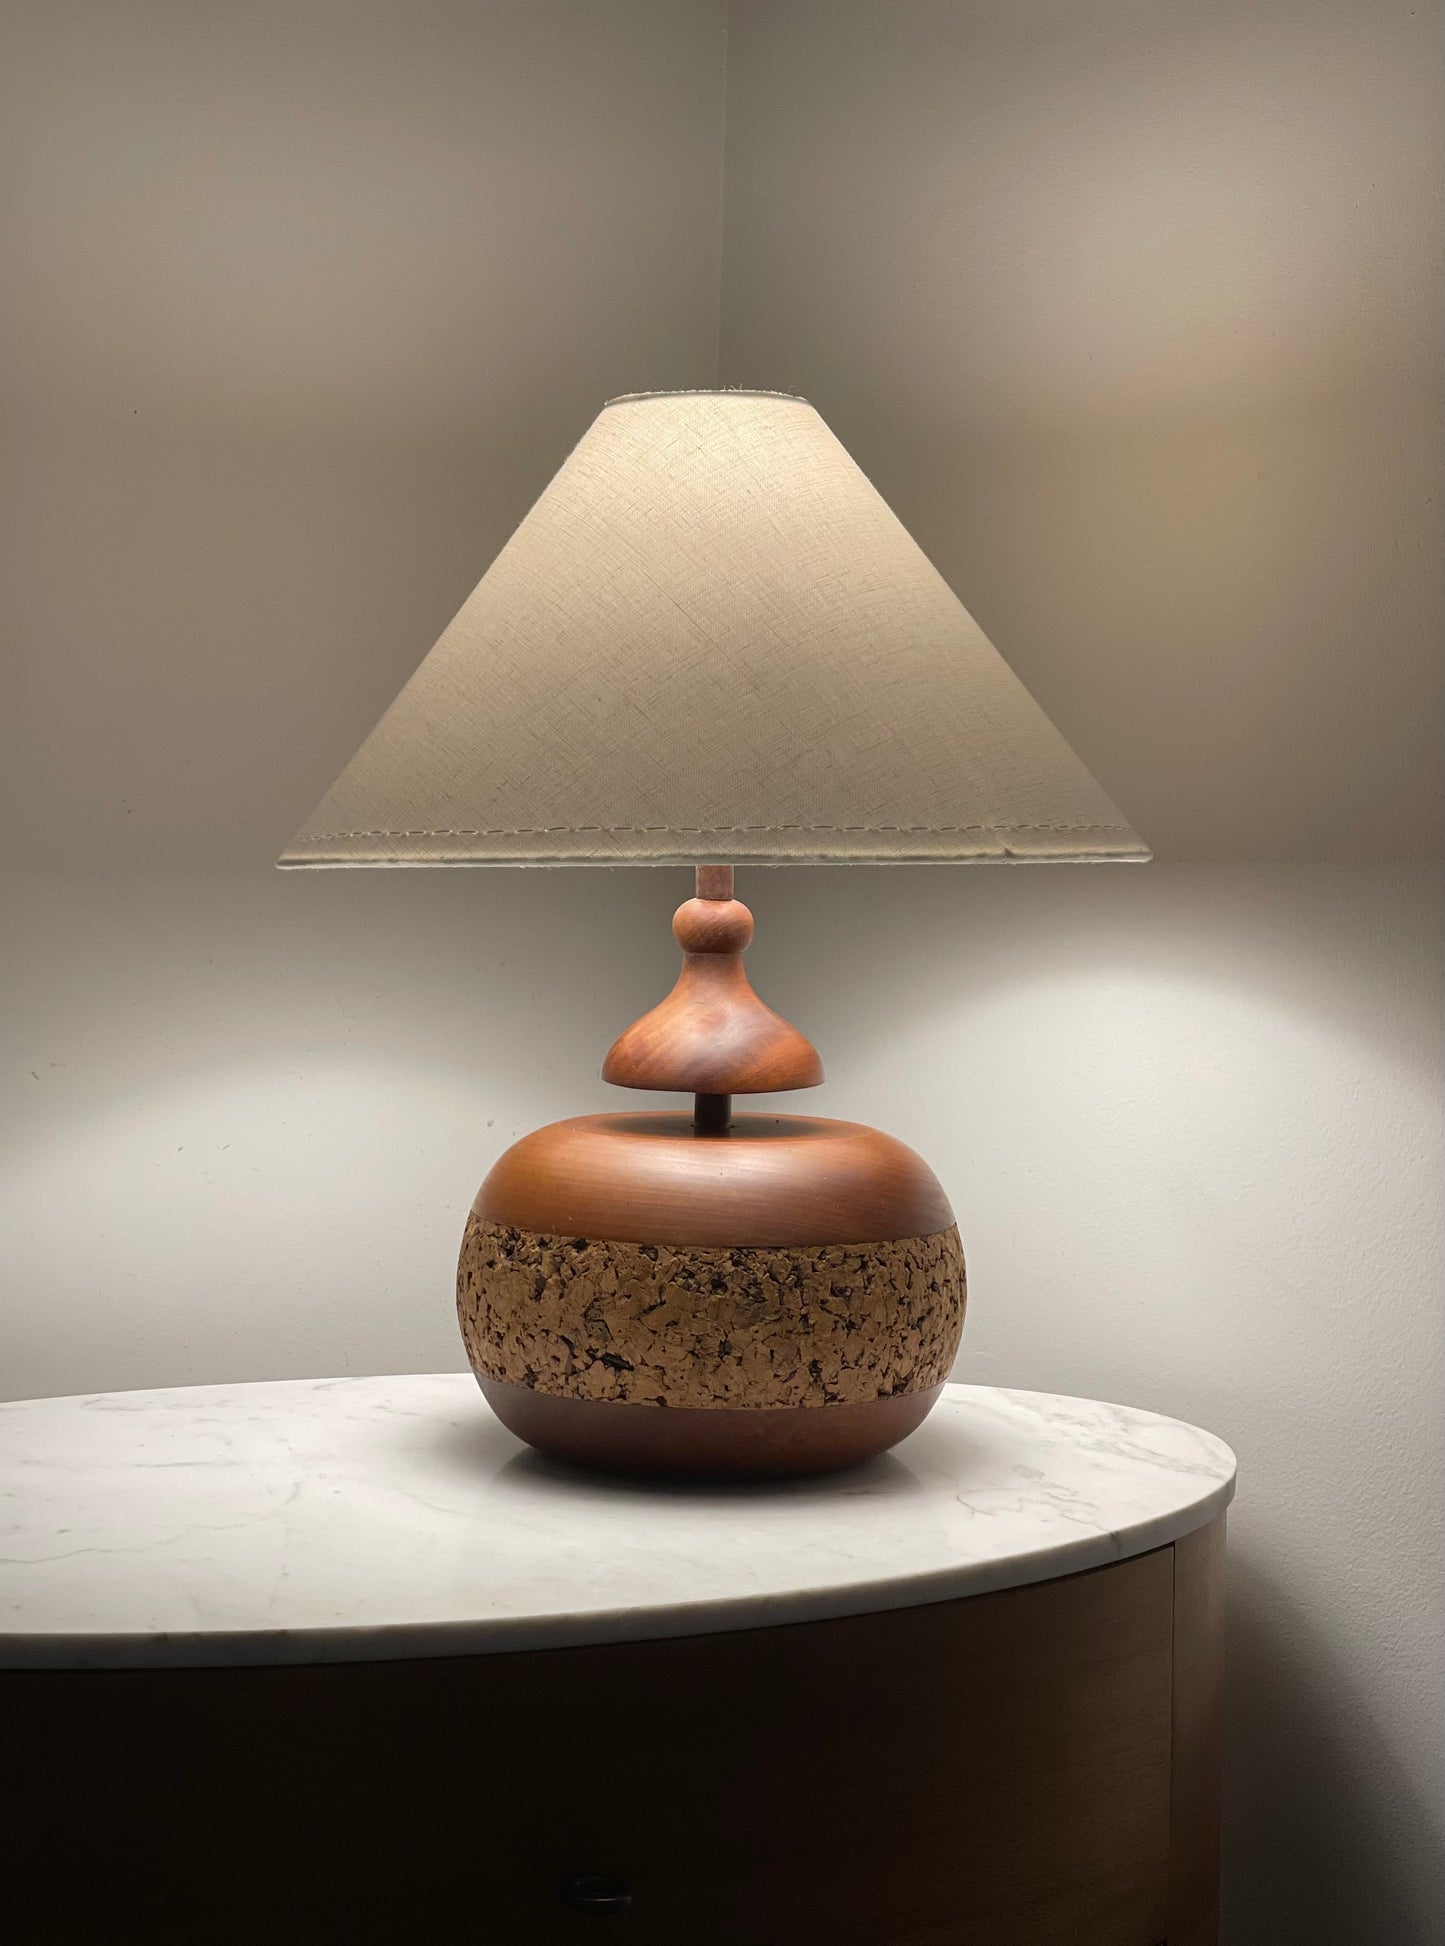 Vintage Timber & Cork Base with Linen Shade Lamp